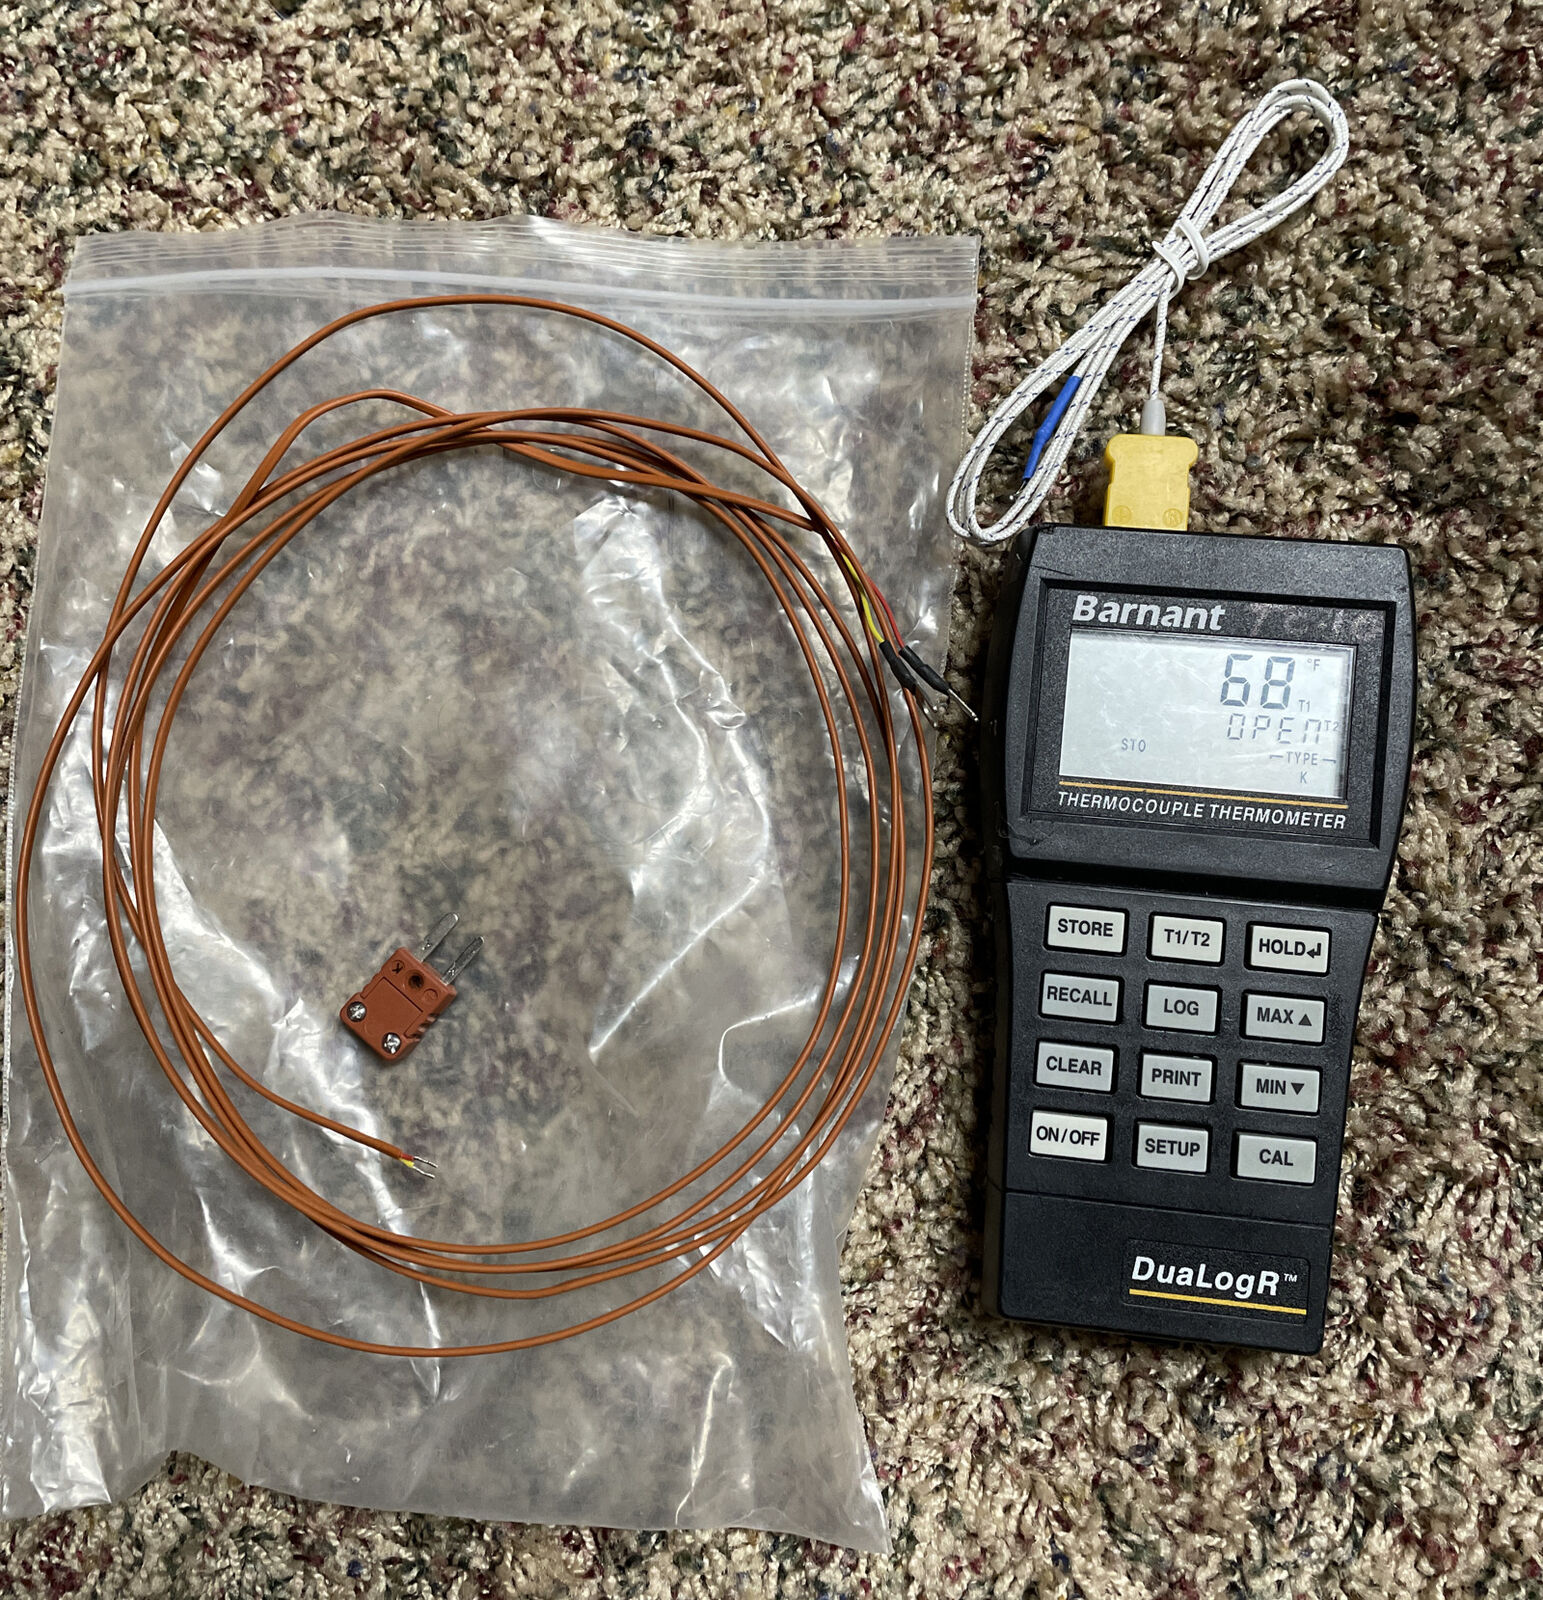 Barnant Thermocouple Thermometer Data Logging MODEL 600-1050 with Thermocouples